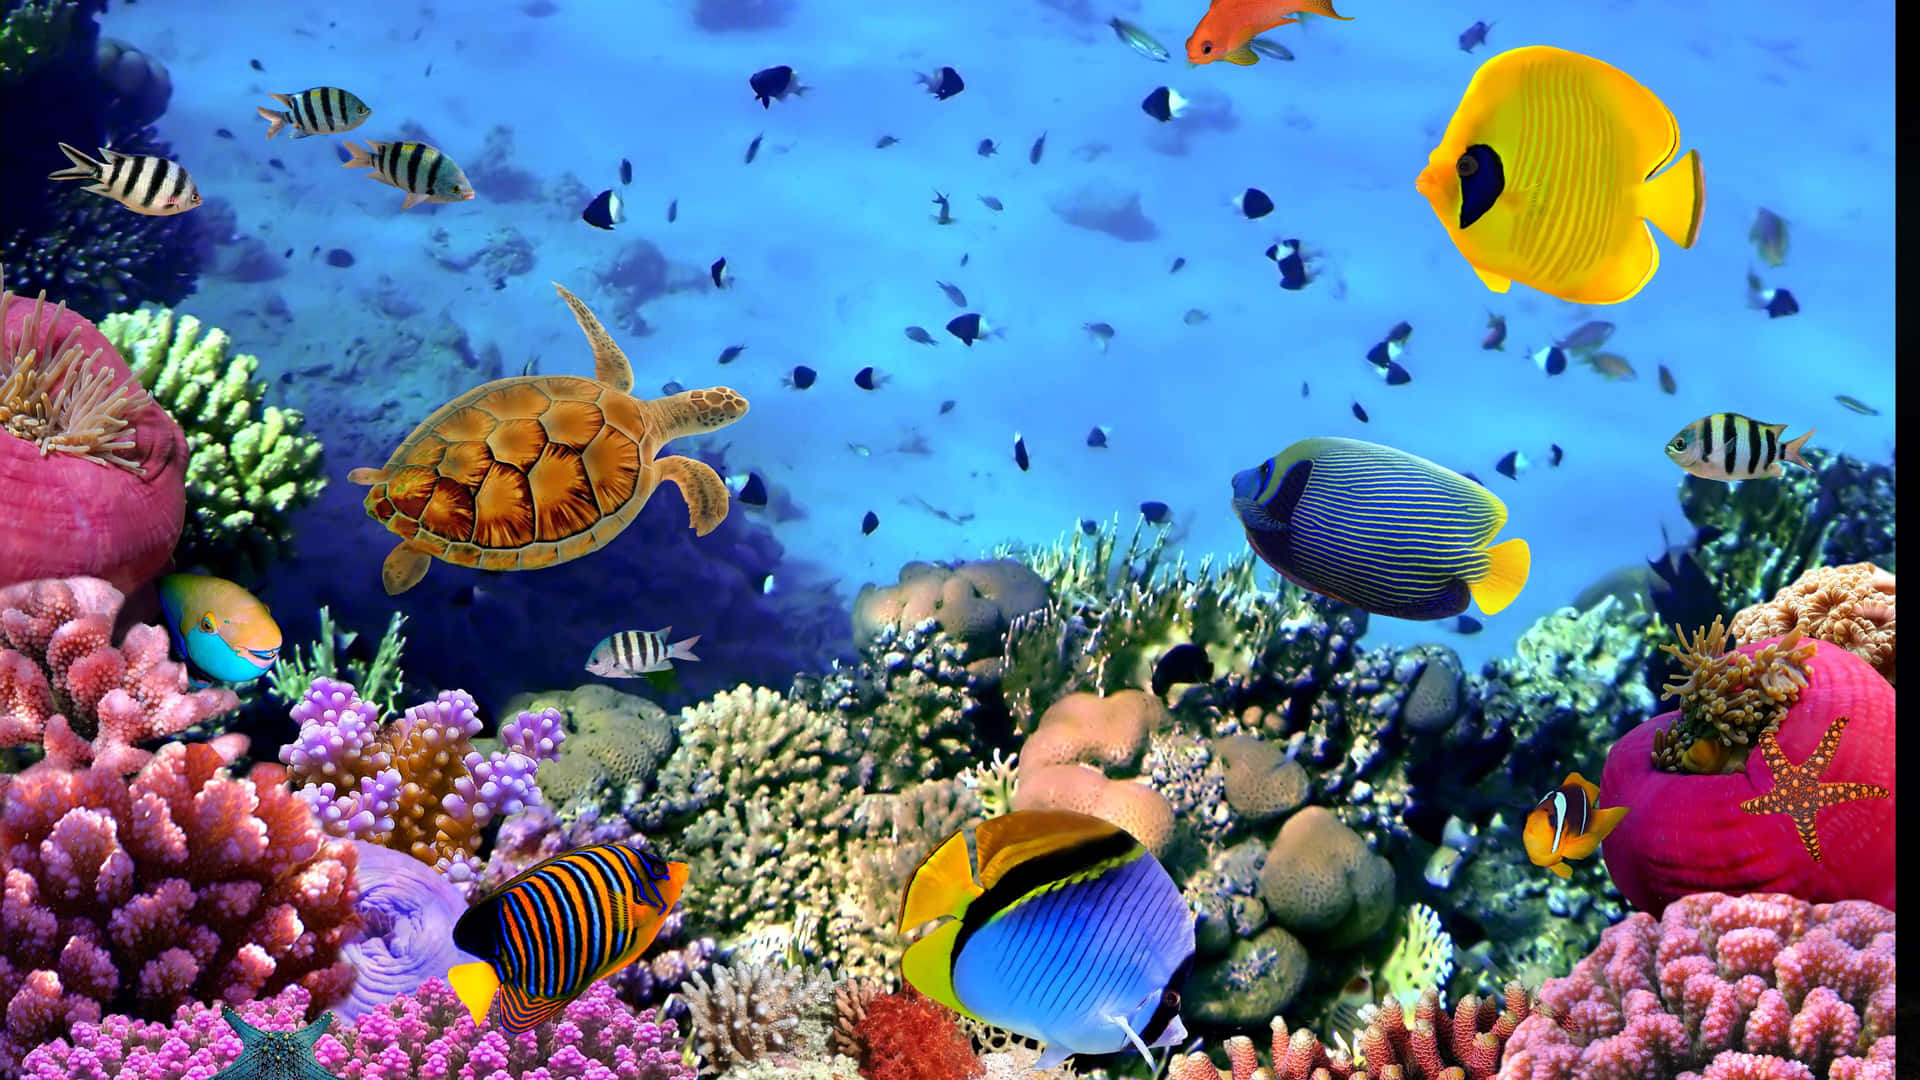 A colorful underwater fantasy in a fish tank